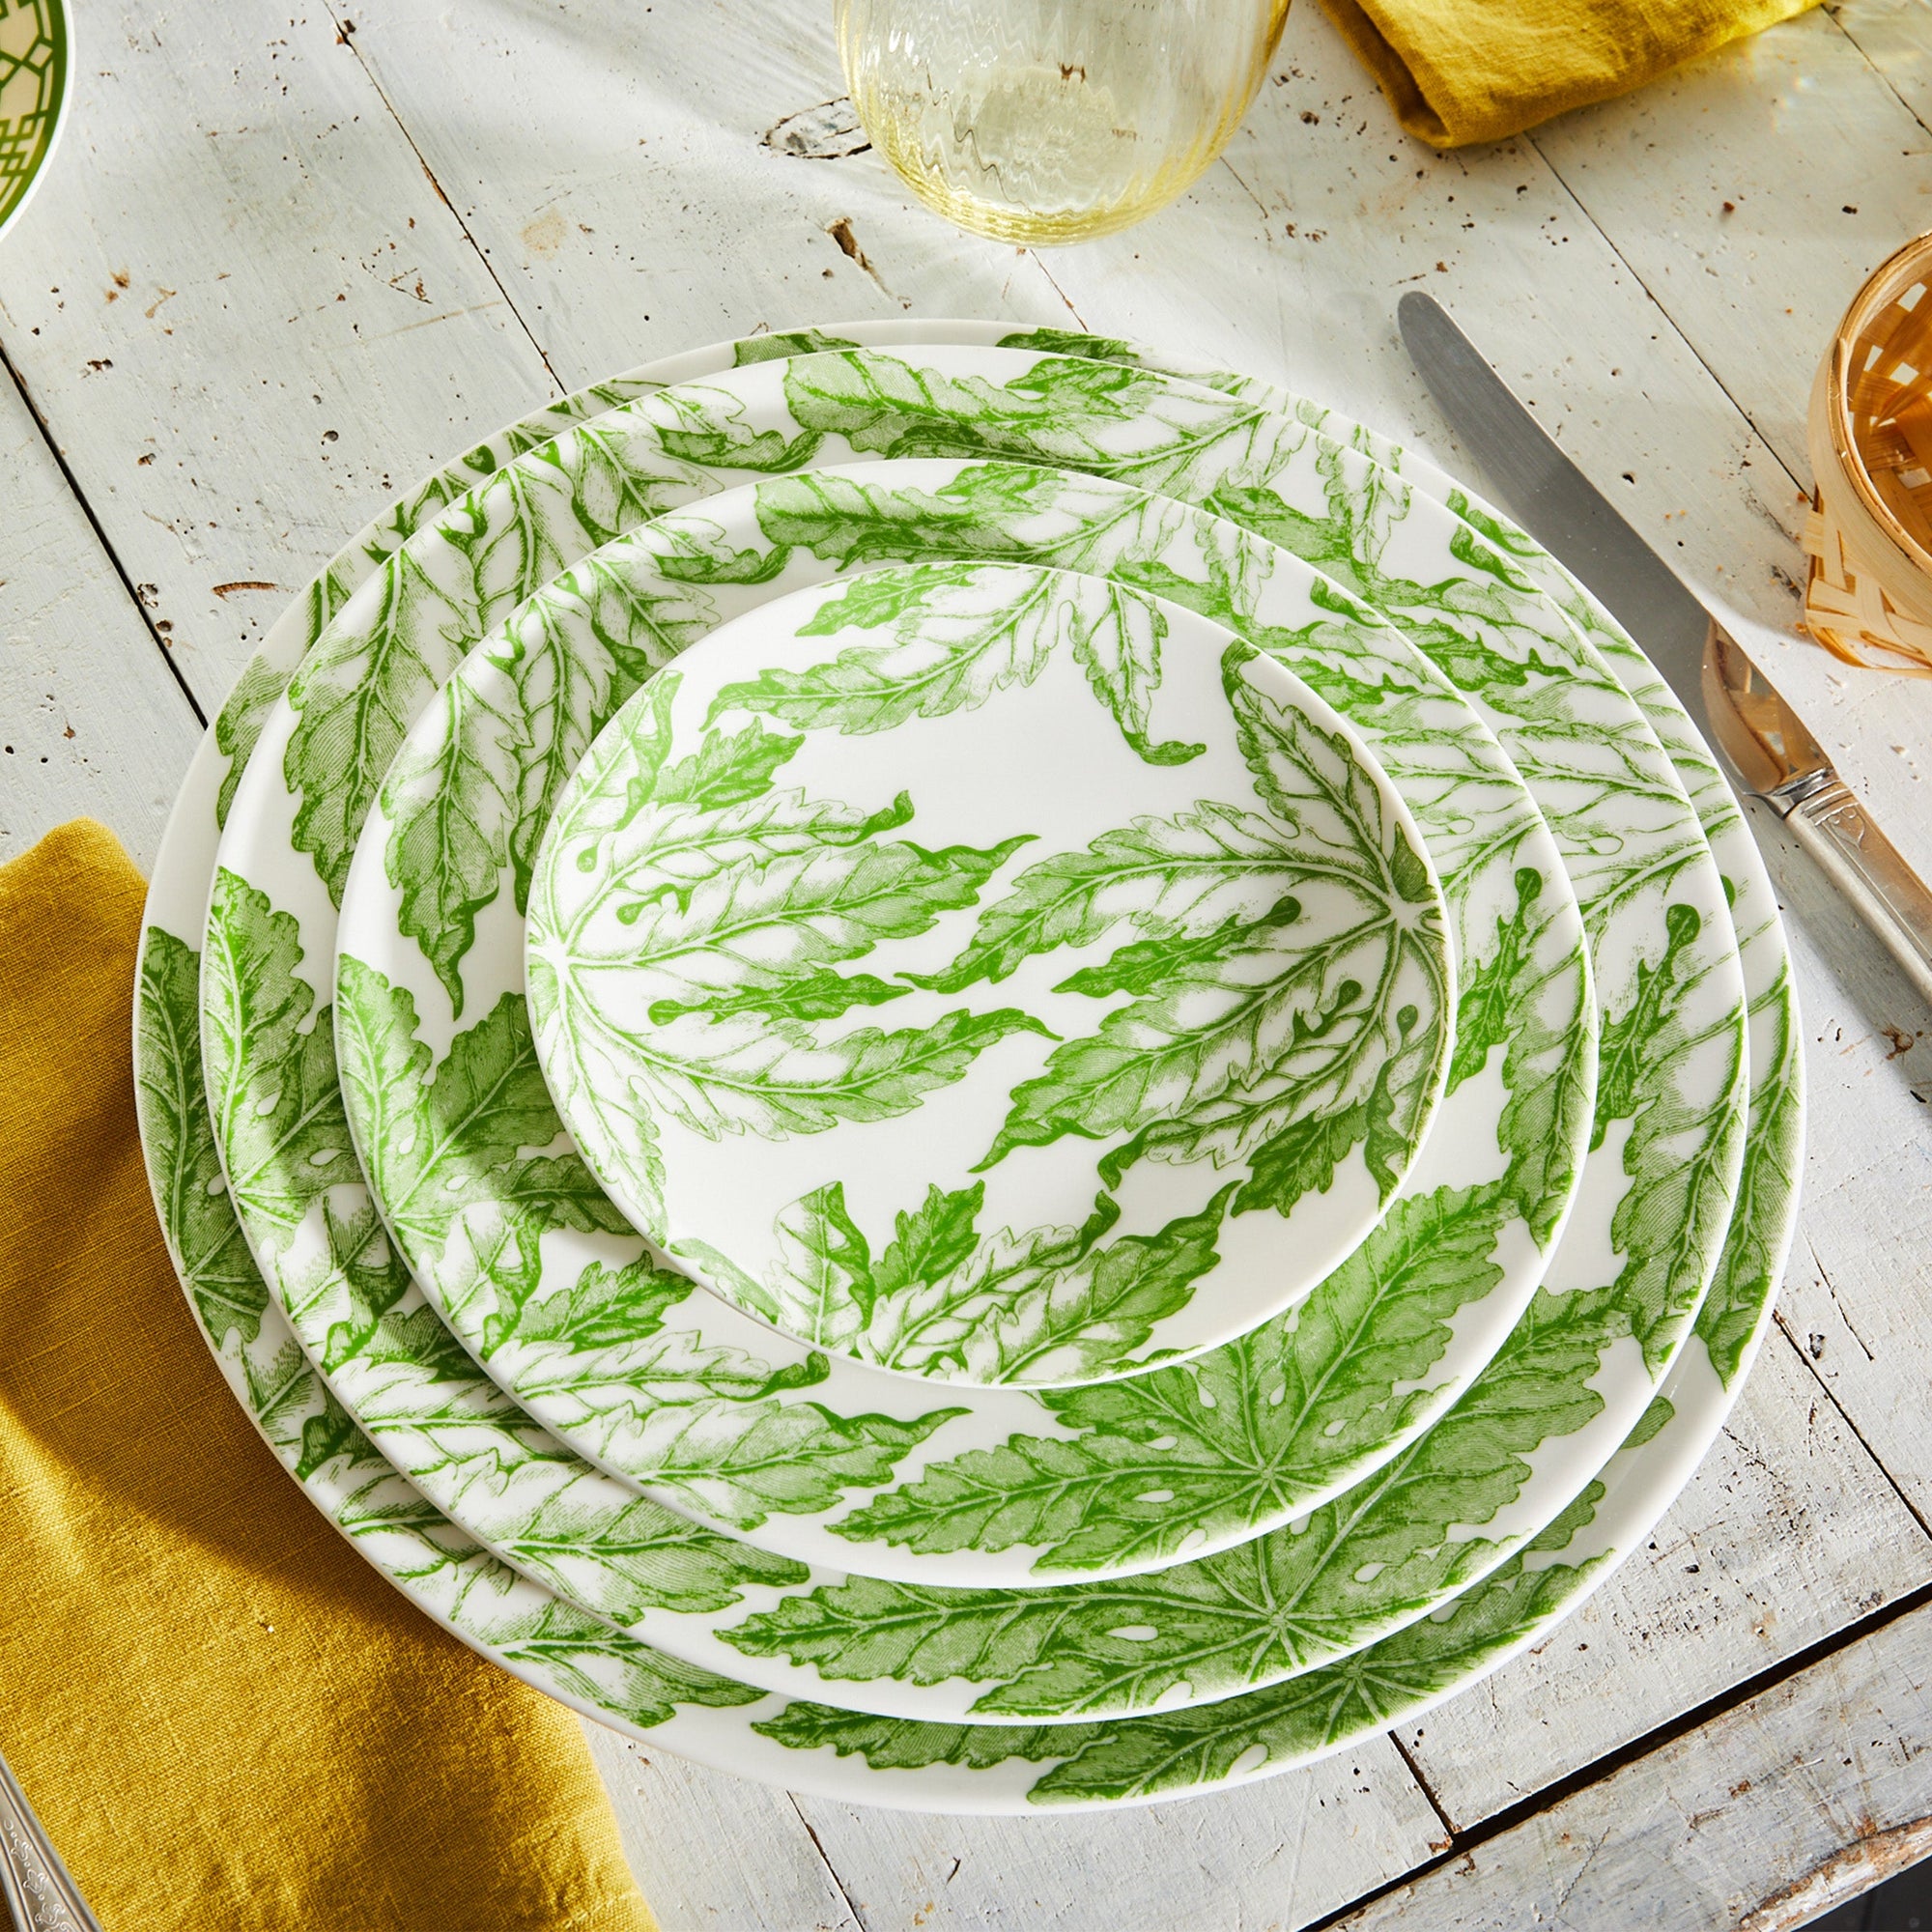 Freya in Green and White Porcelain Tableware, Charger Plate or Round Serving Platter from Caskata